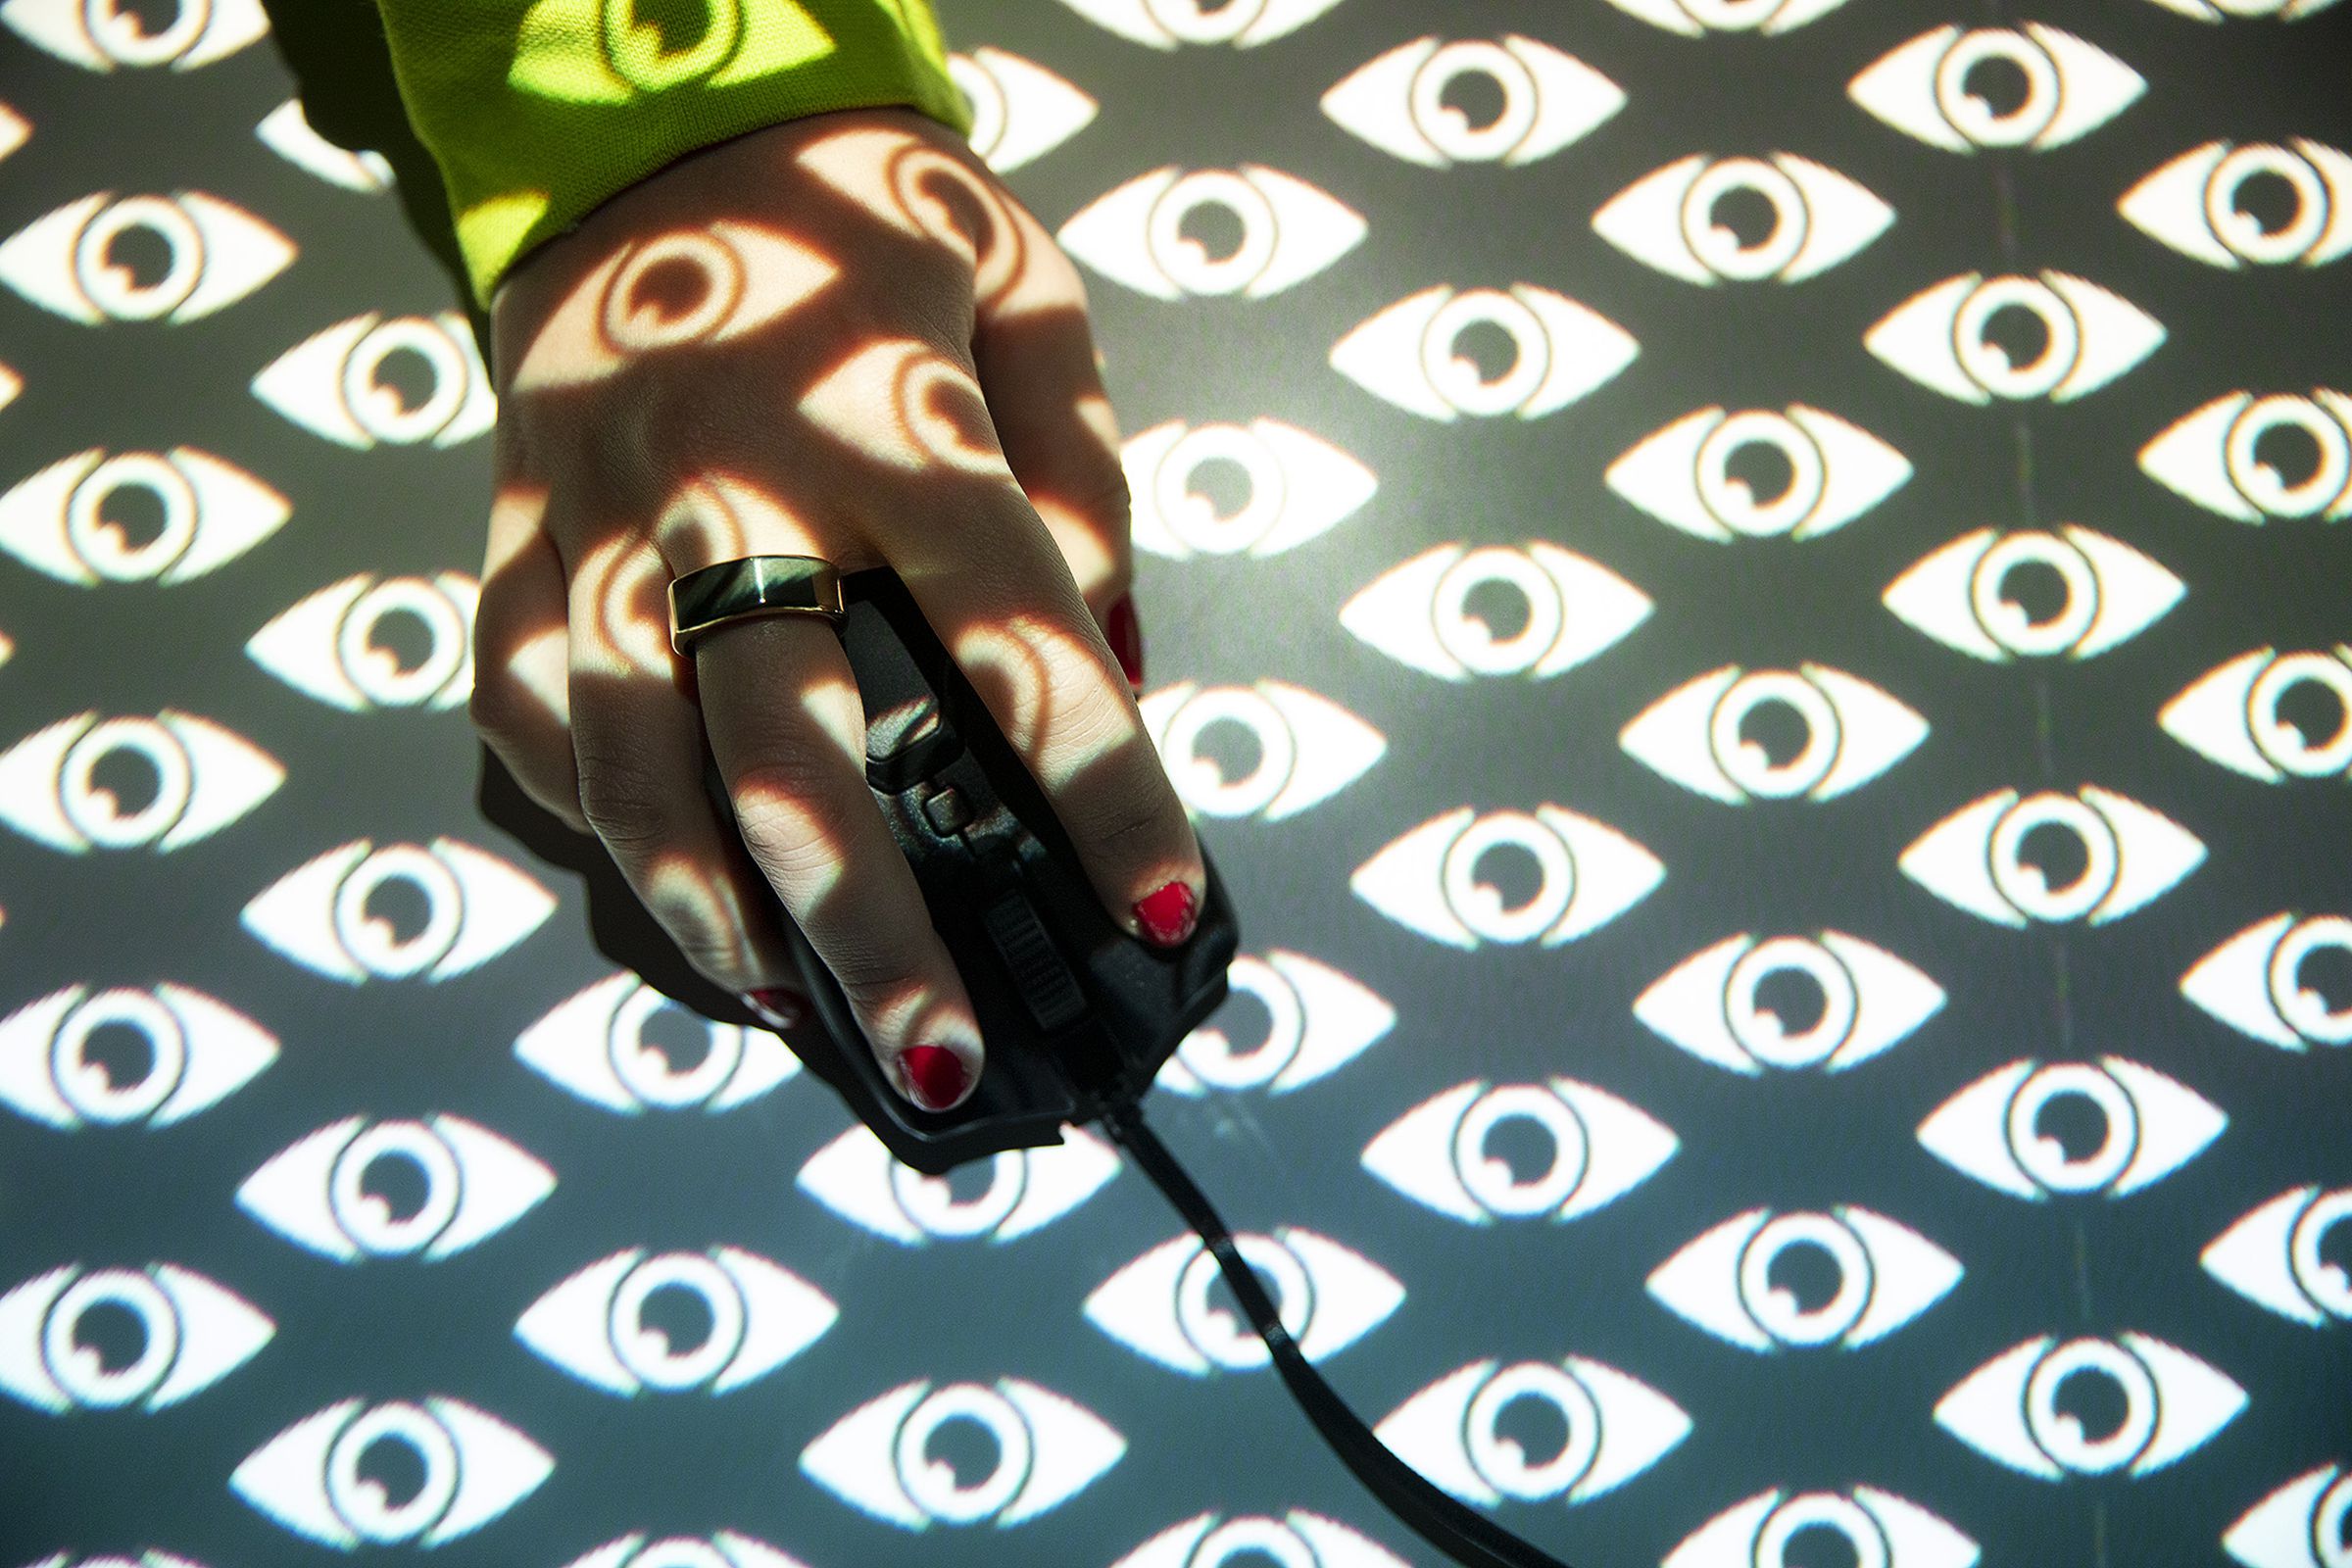 The image shows a hand operating a computer mouse behind an illustrated pattern of eyes.